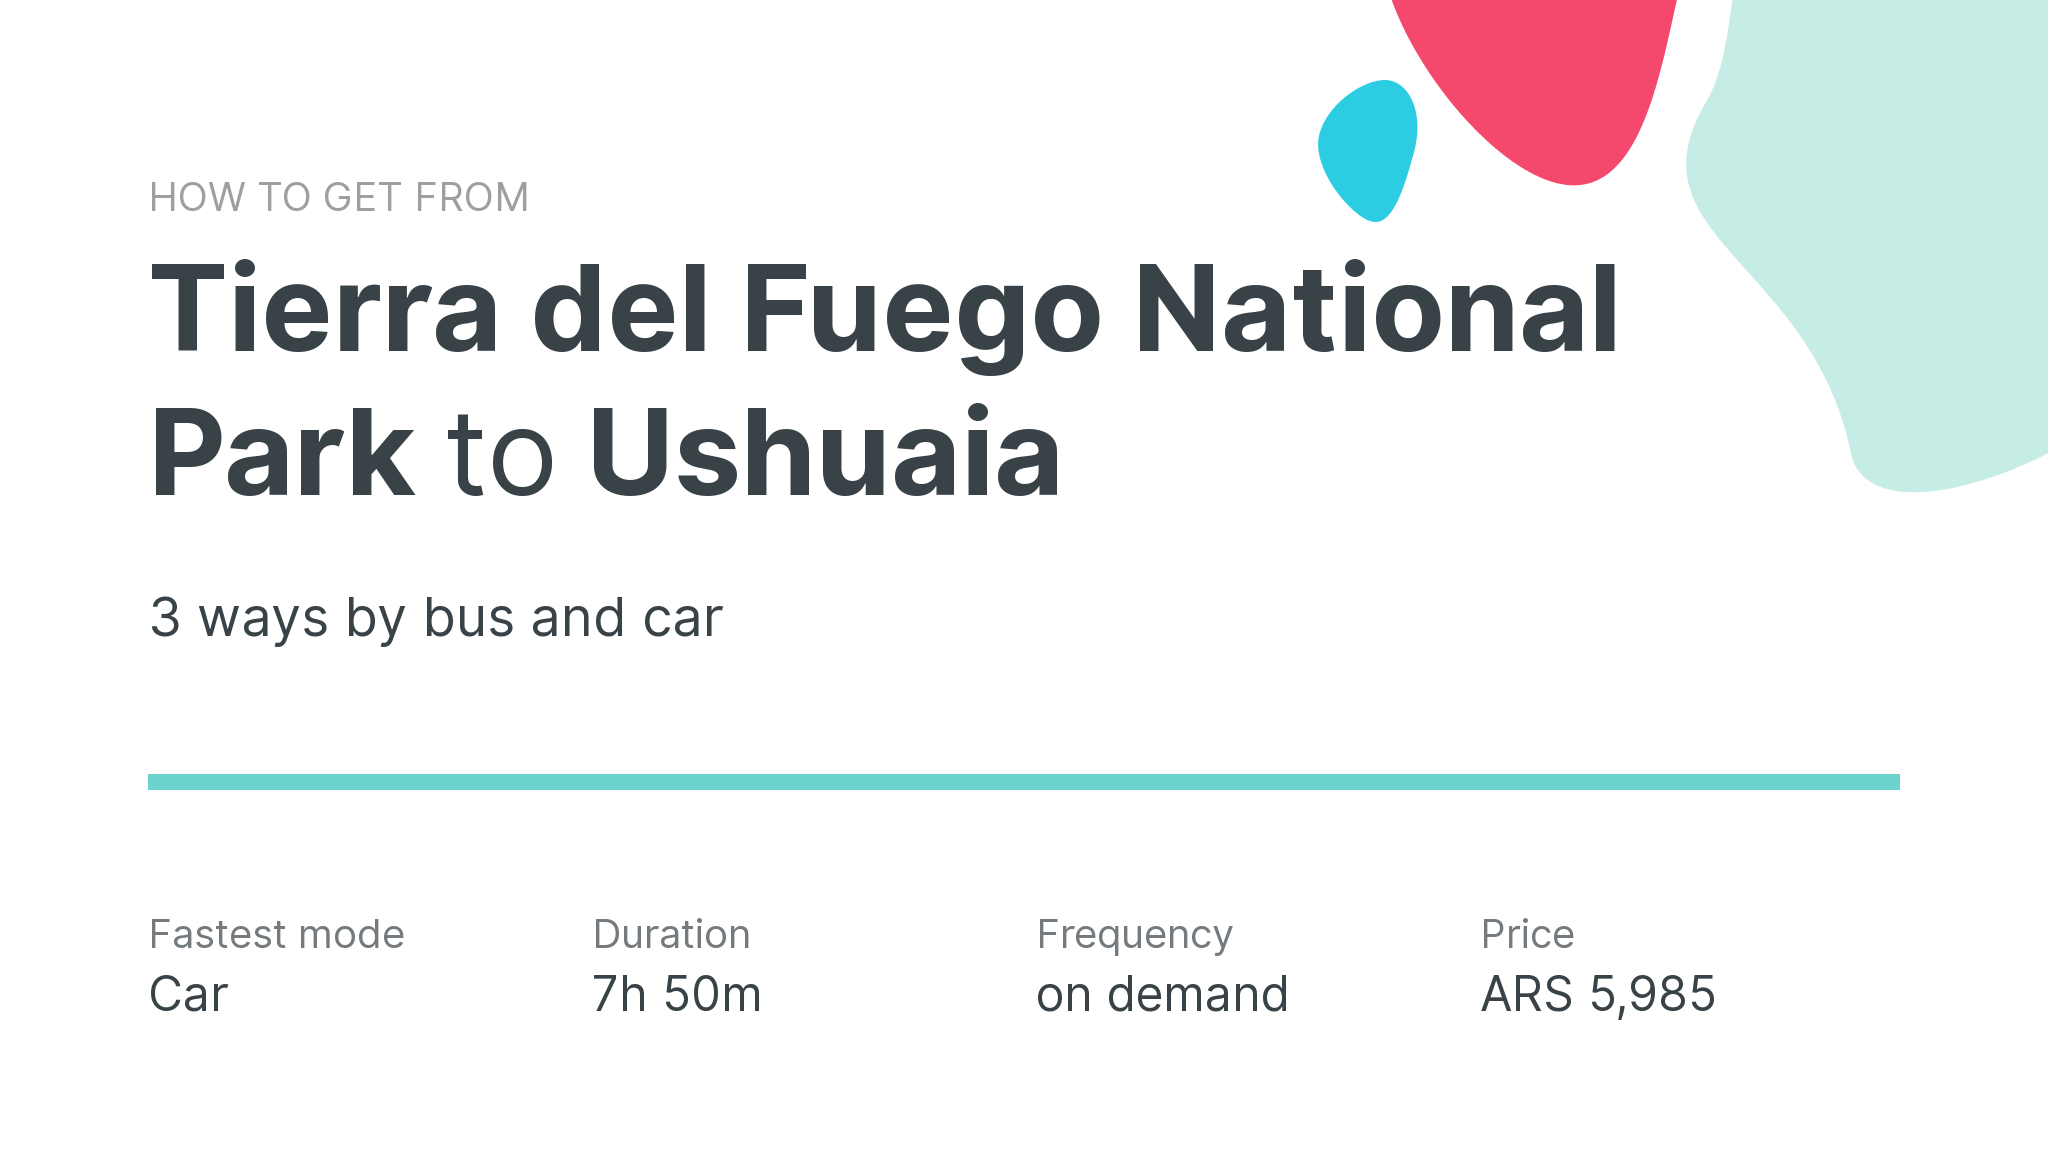 How do I get from Tierra del Fuego National Park to Ushuaia